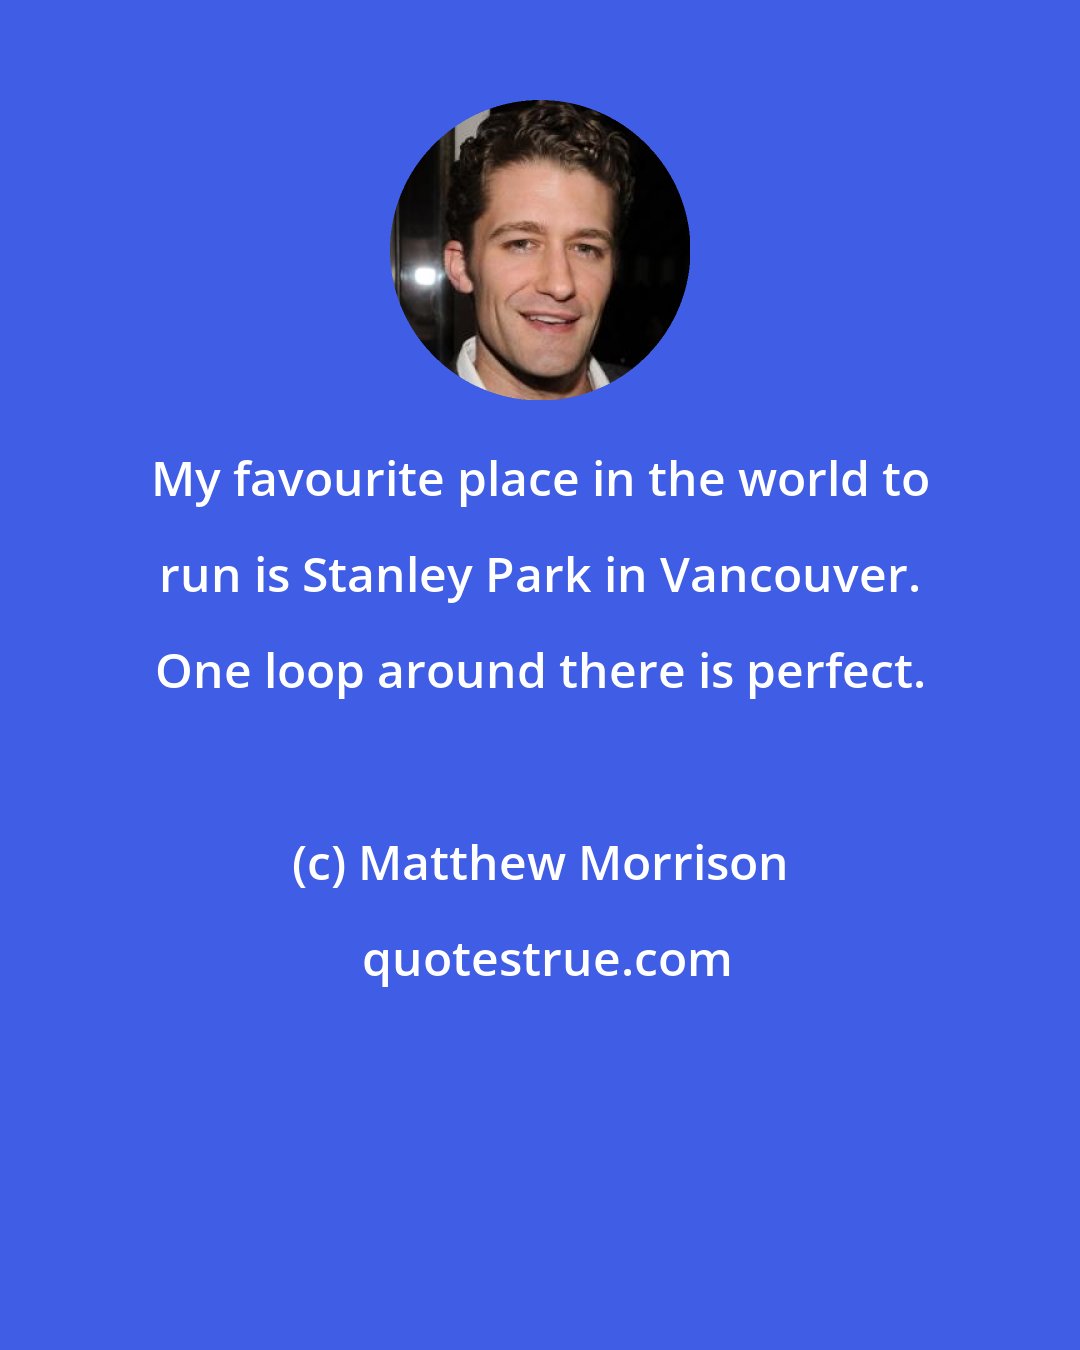 Matthew Morrison: My favourite place in the world to run is Stanley Park in Vancouver. One loop around there is perfect.